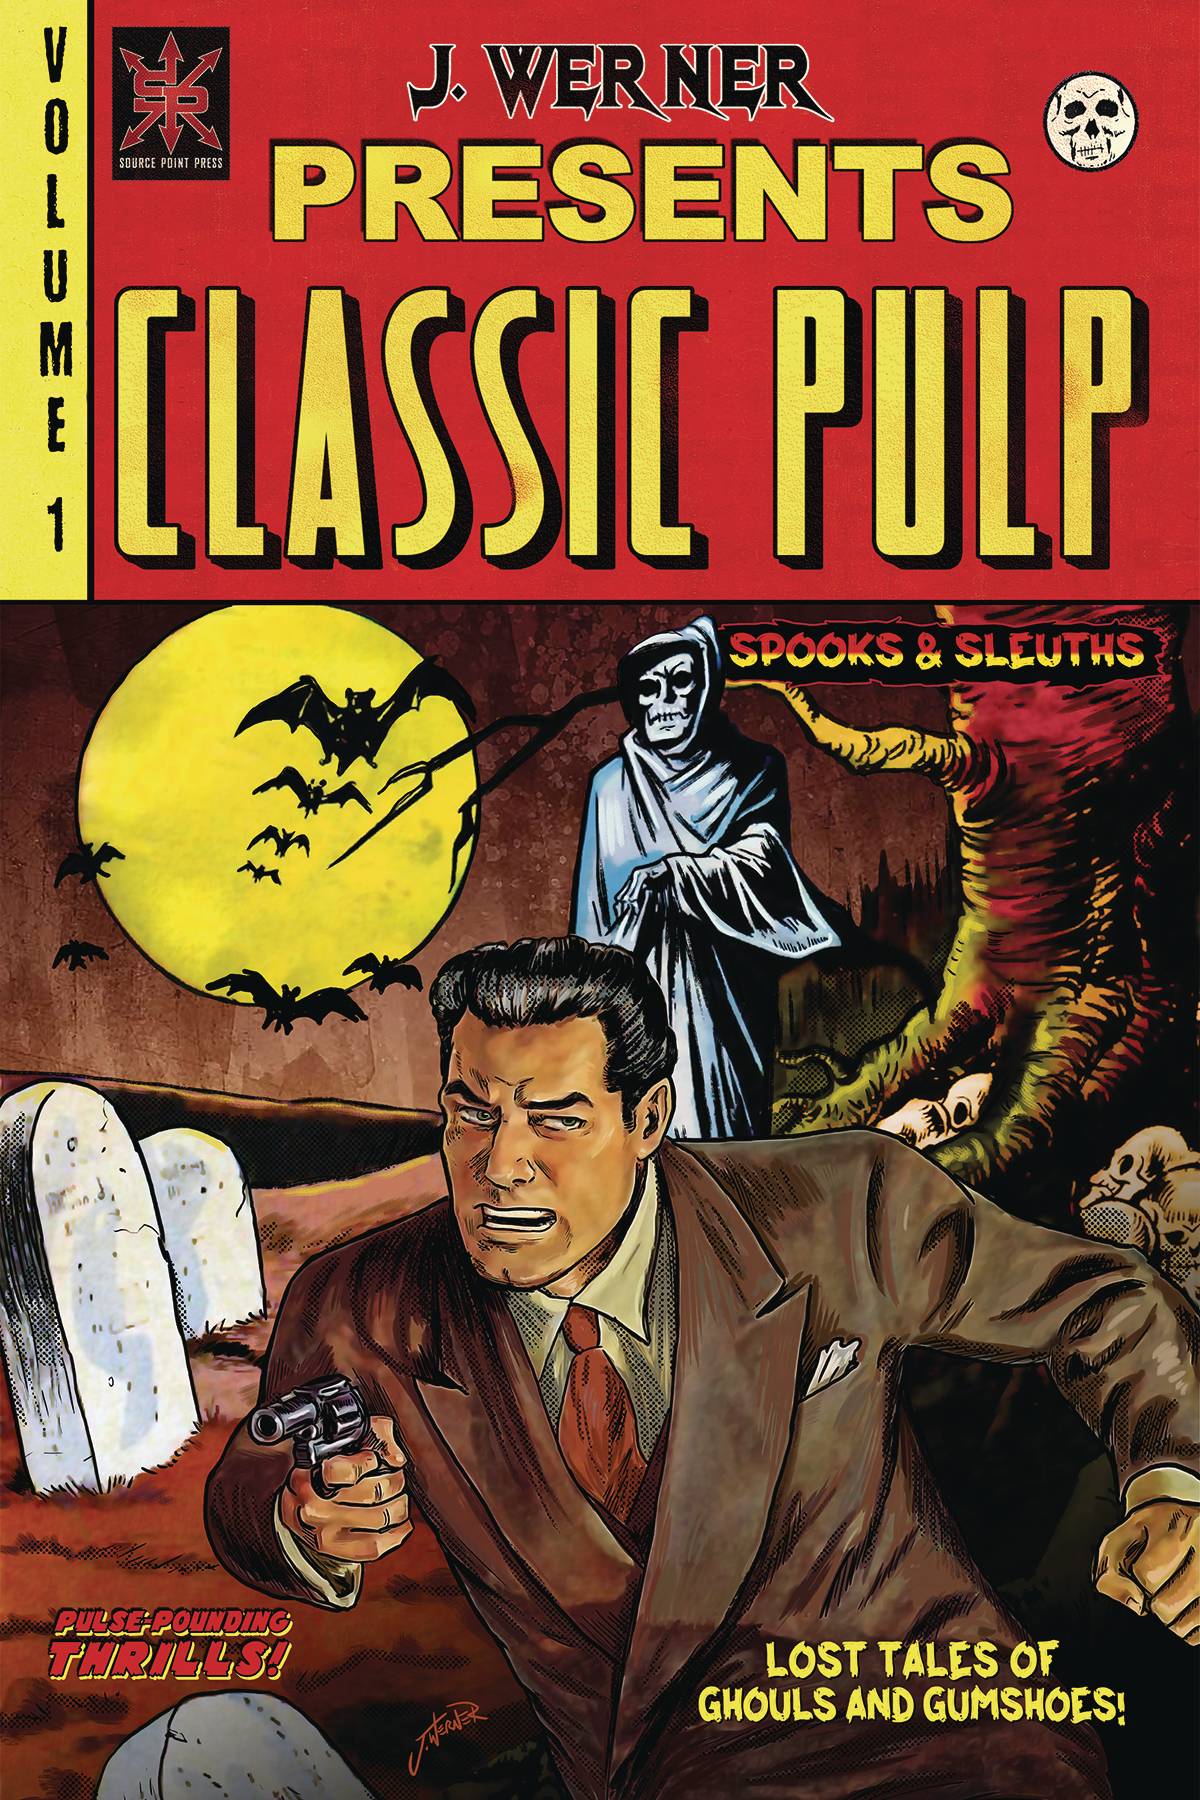 CLASSIC PULP TP #1 SPOOKS AND SLEUTHS